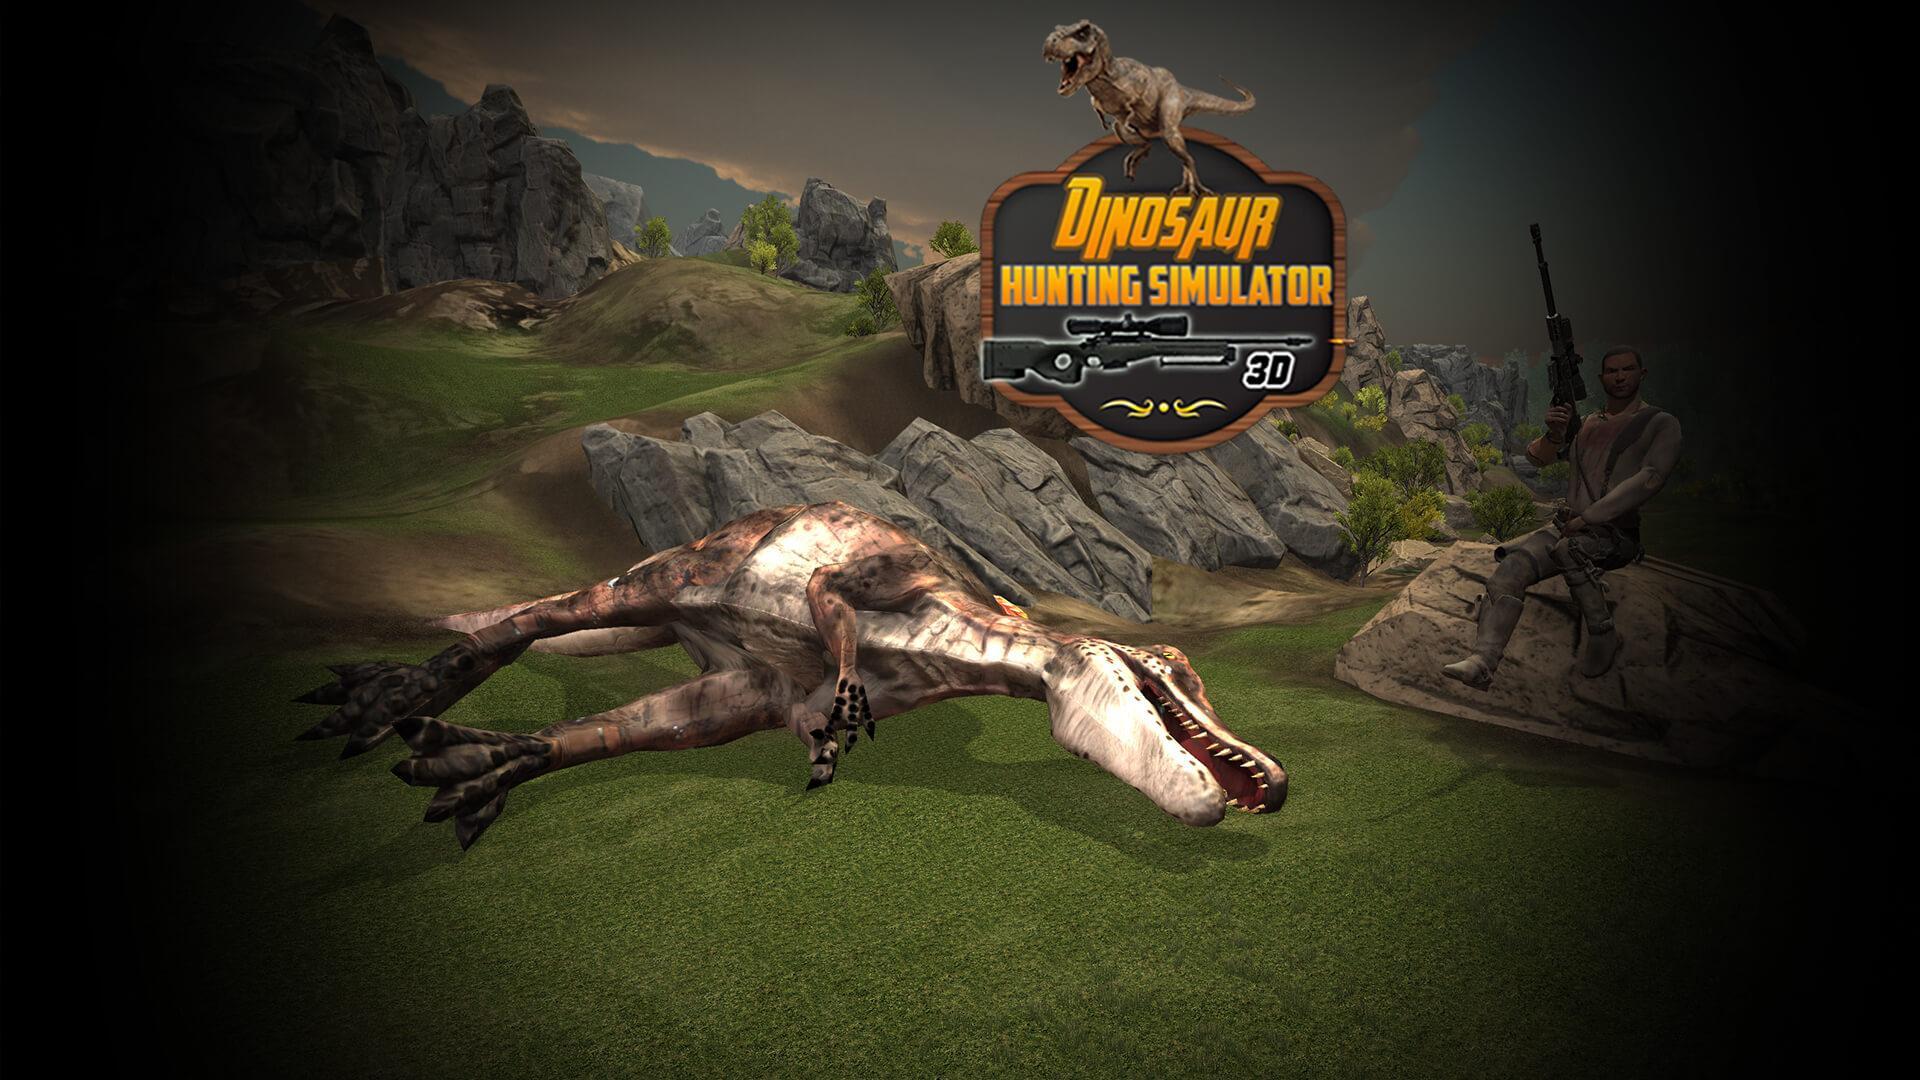 Dinosaur Hunting Simulator 3d For Android Apk Download - bug catching simulator roblox